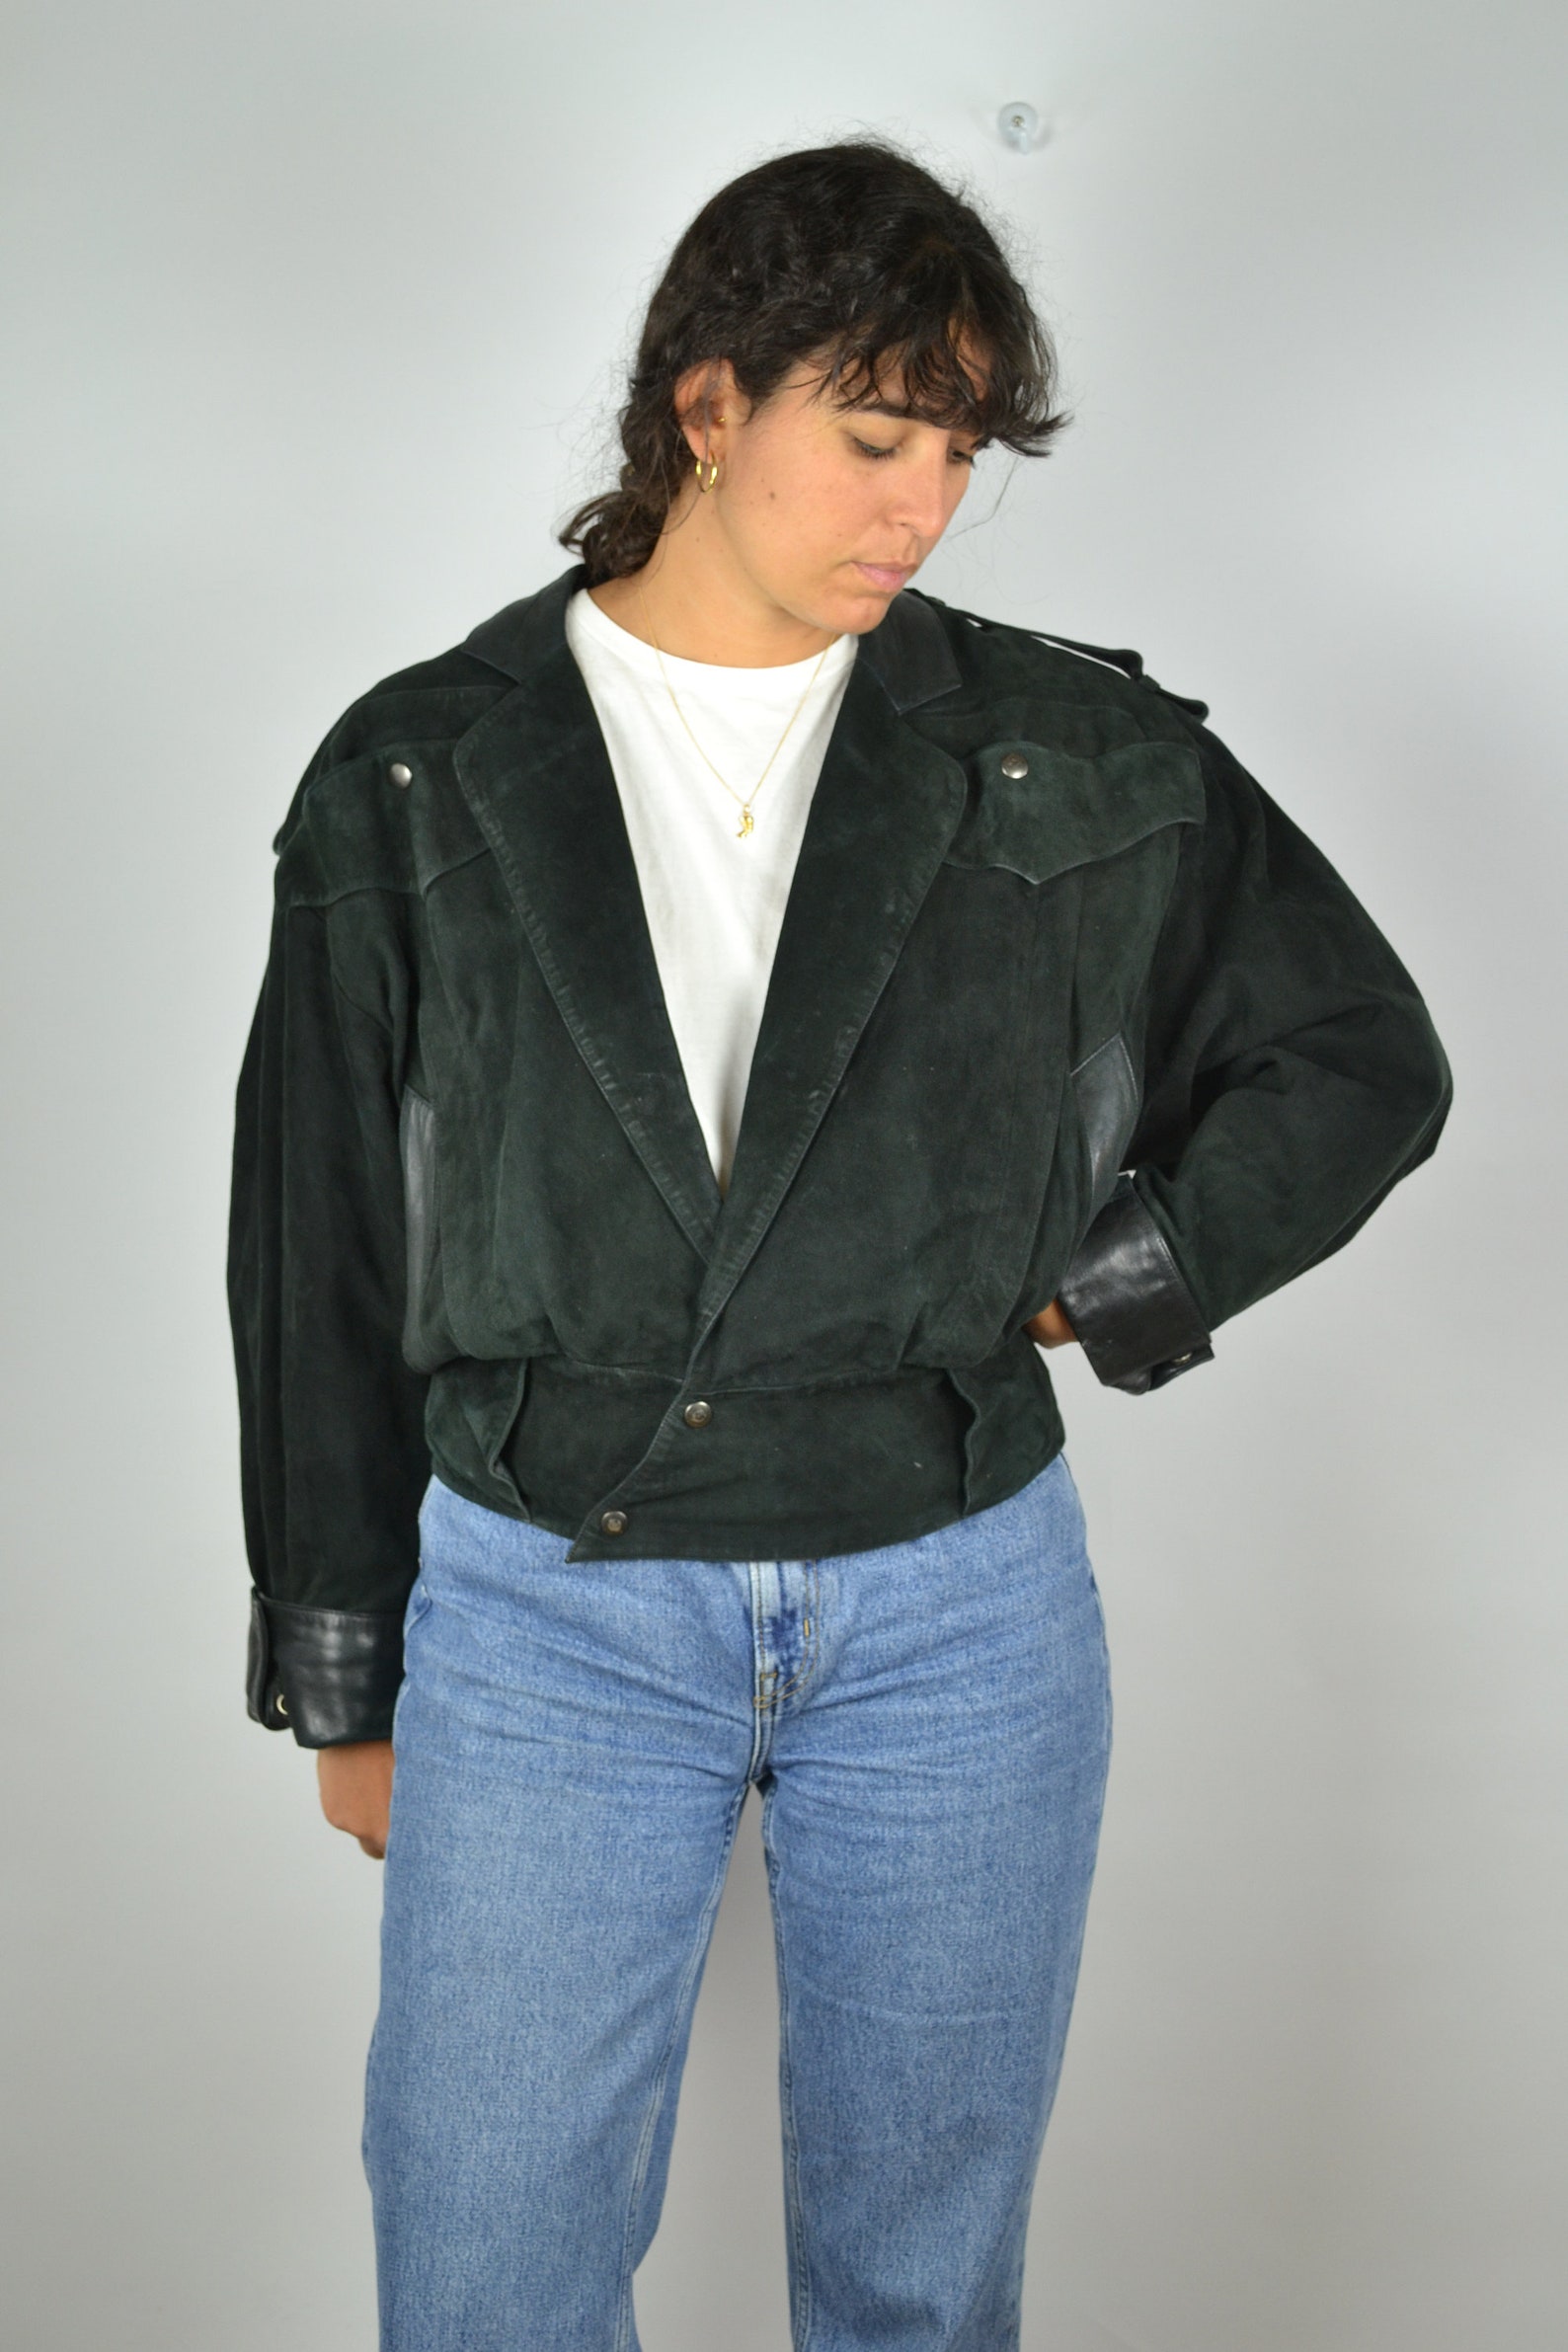 CLAUDE MONTANA Designer Leather Jacket From the 80s Vintage - Etsy